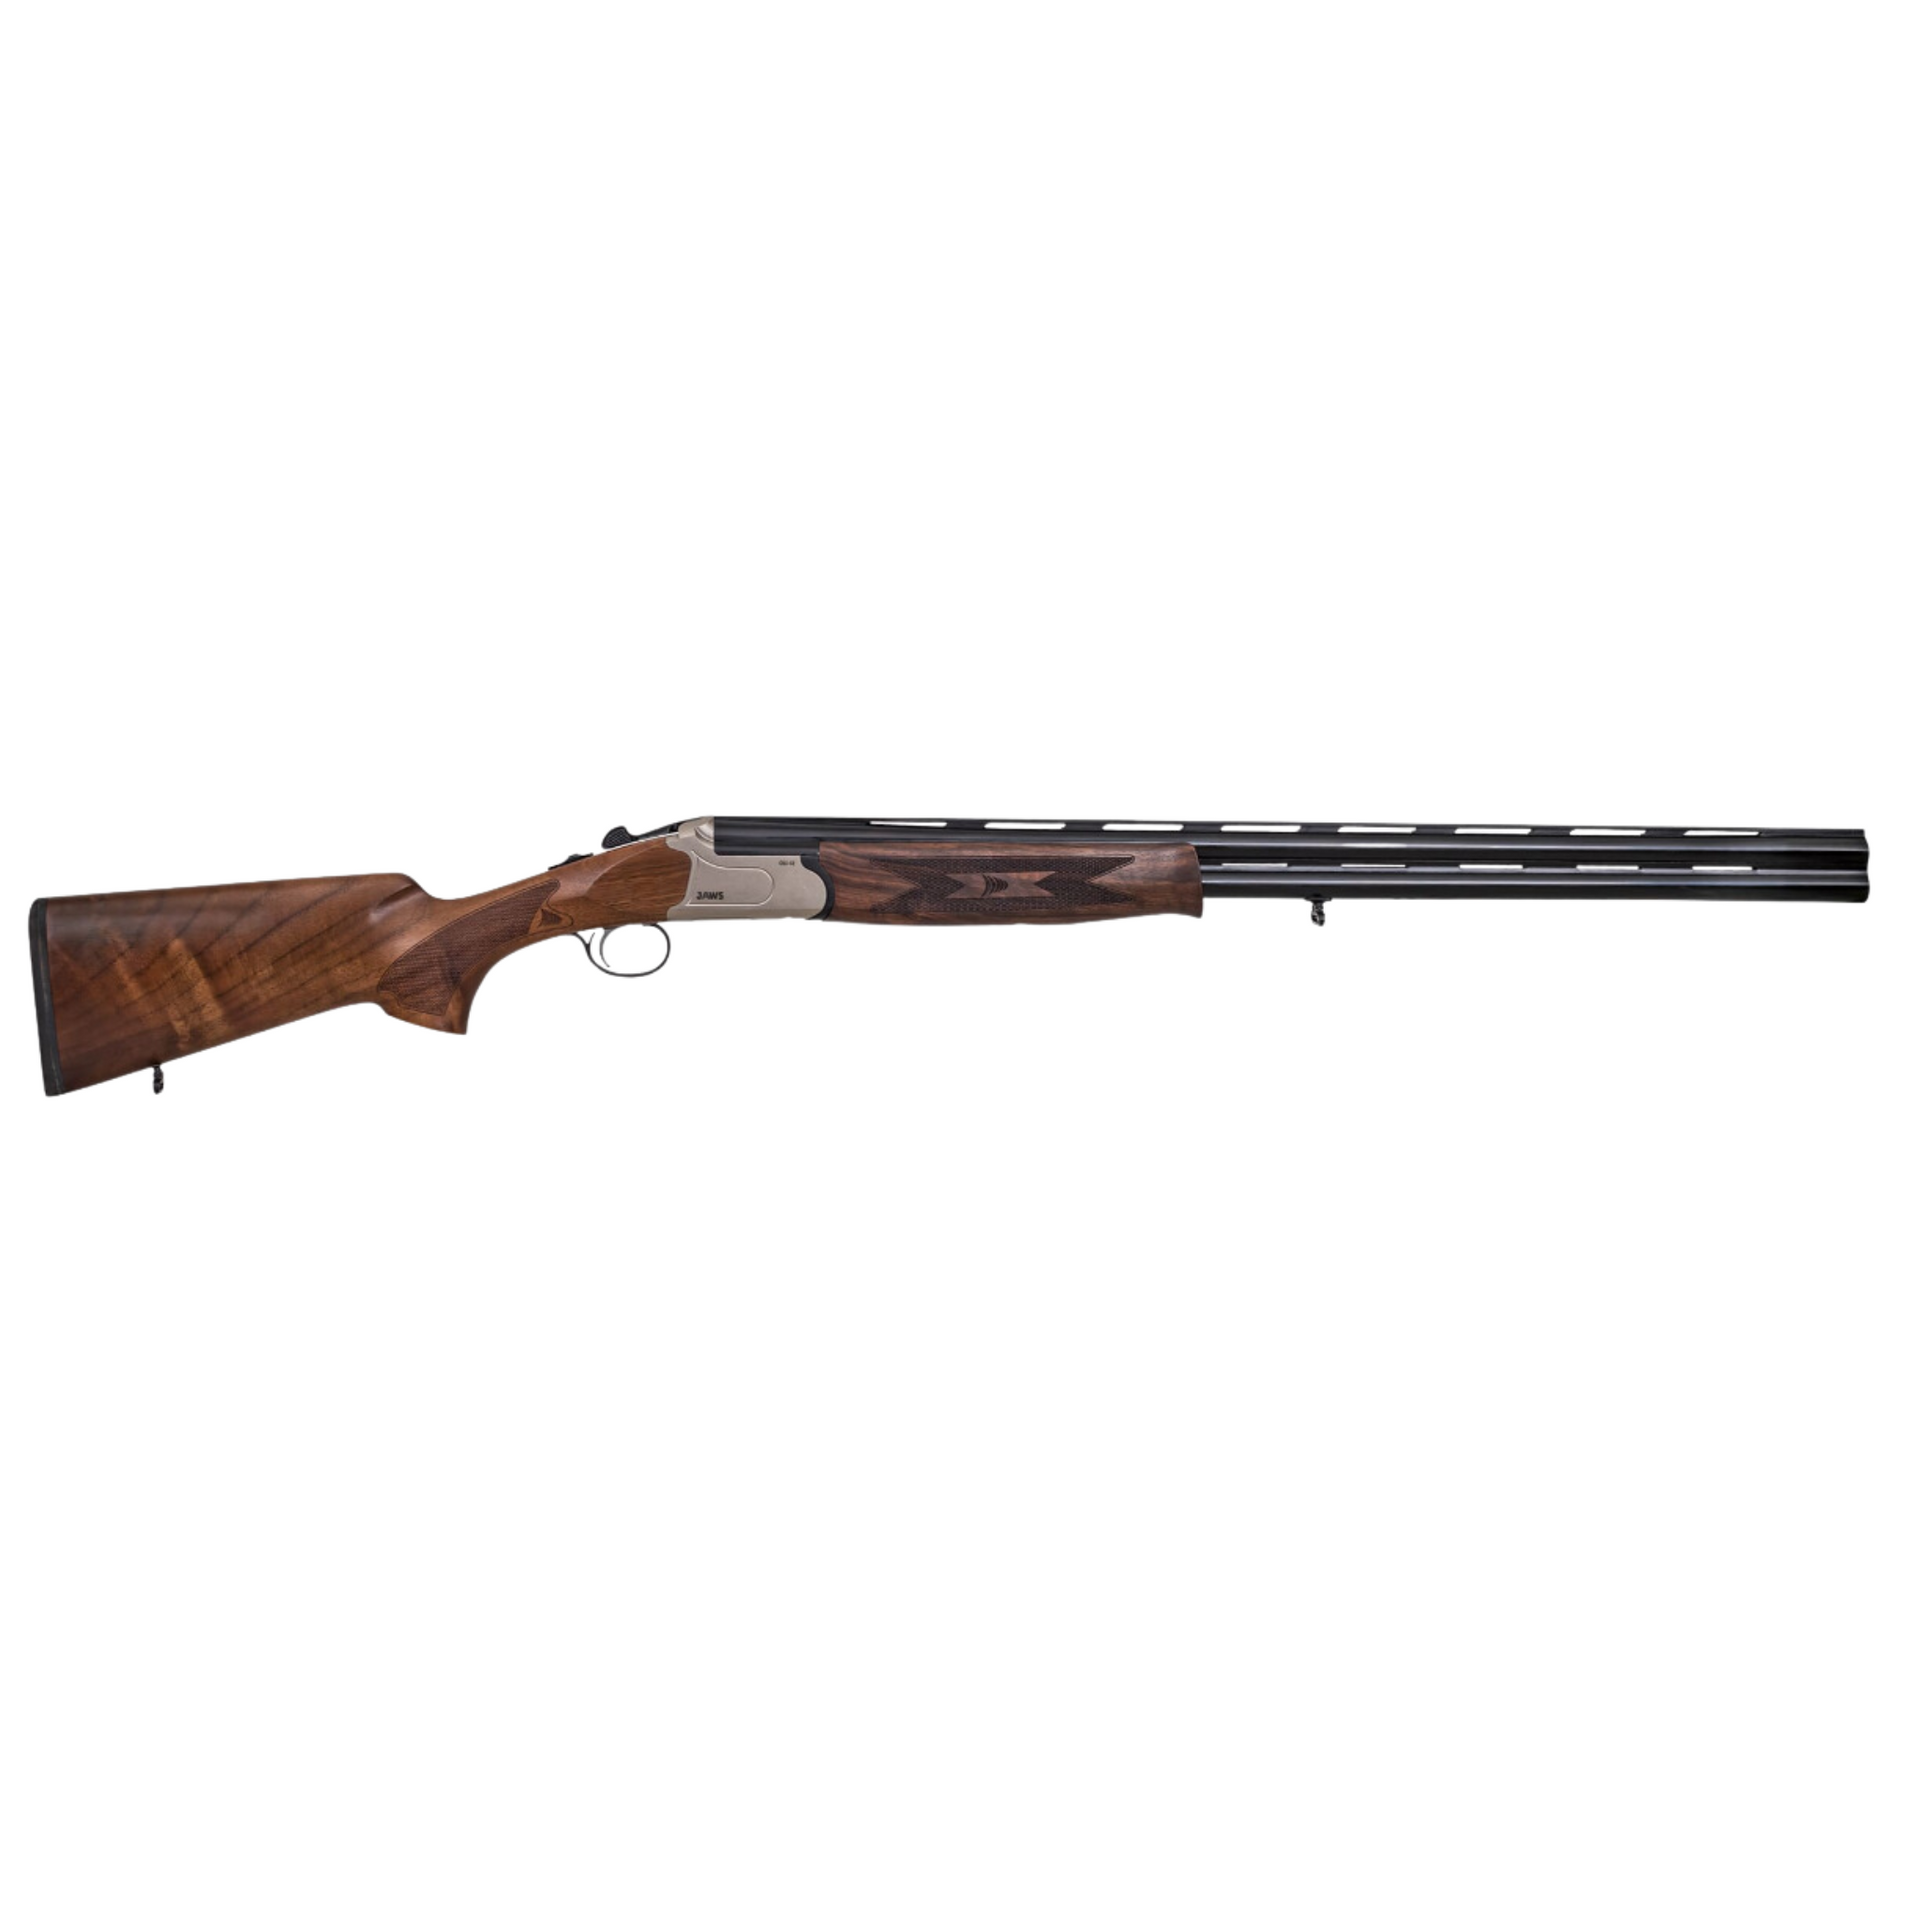 Saricam DB-12 Over-and-Under Walnut, 28 in barrel, 45 overall